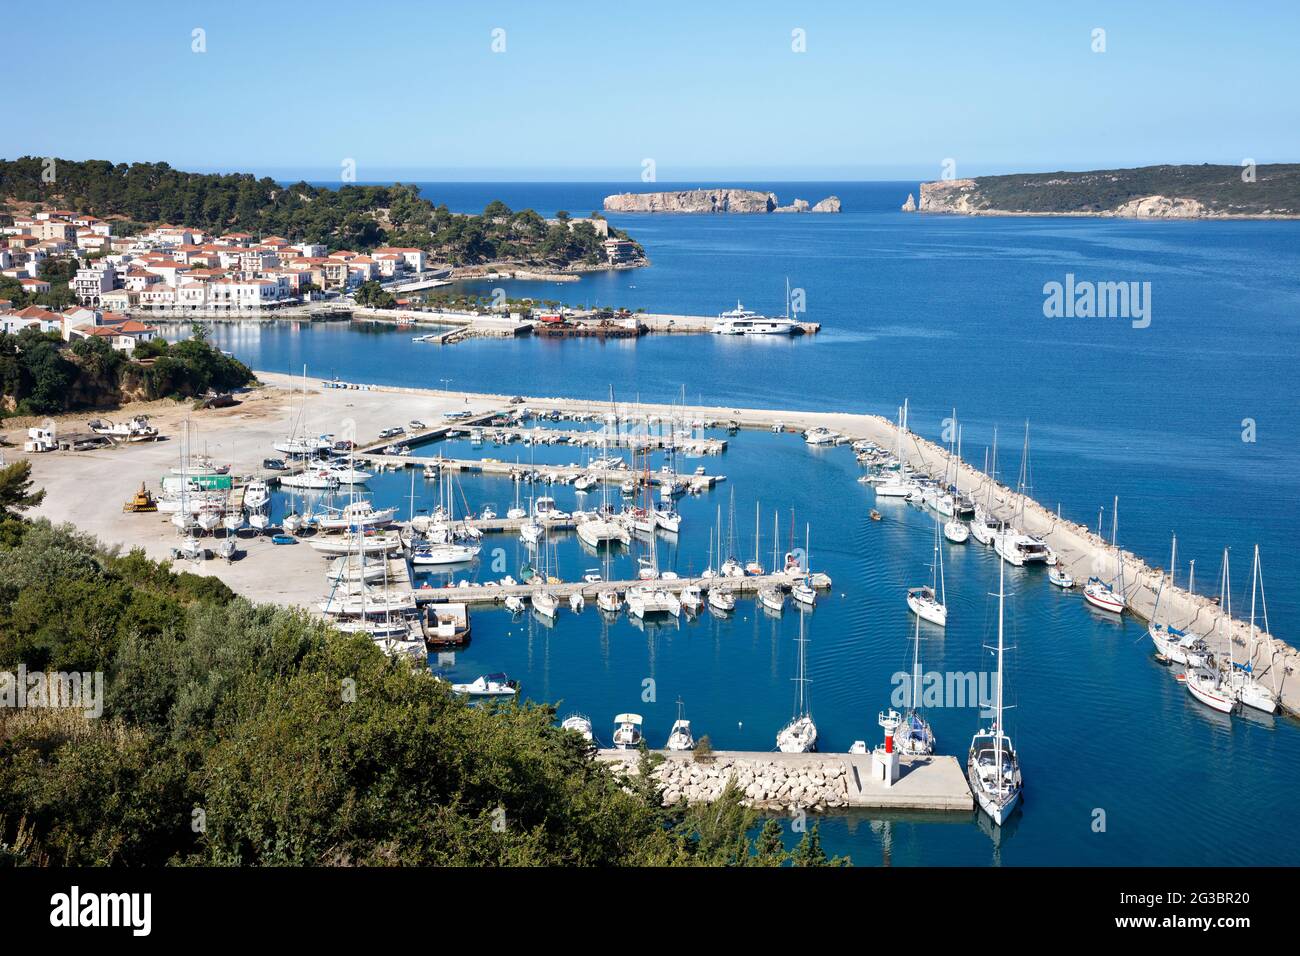 The marina in Pylos within Navarino Bay in the Peloponnese of Greece Stock Photo